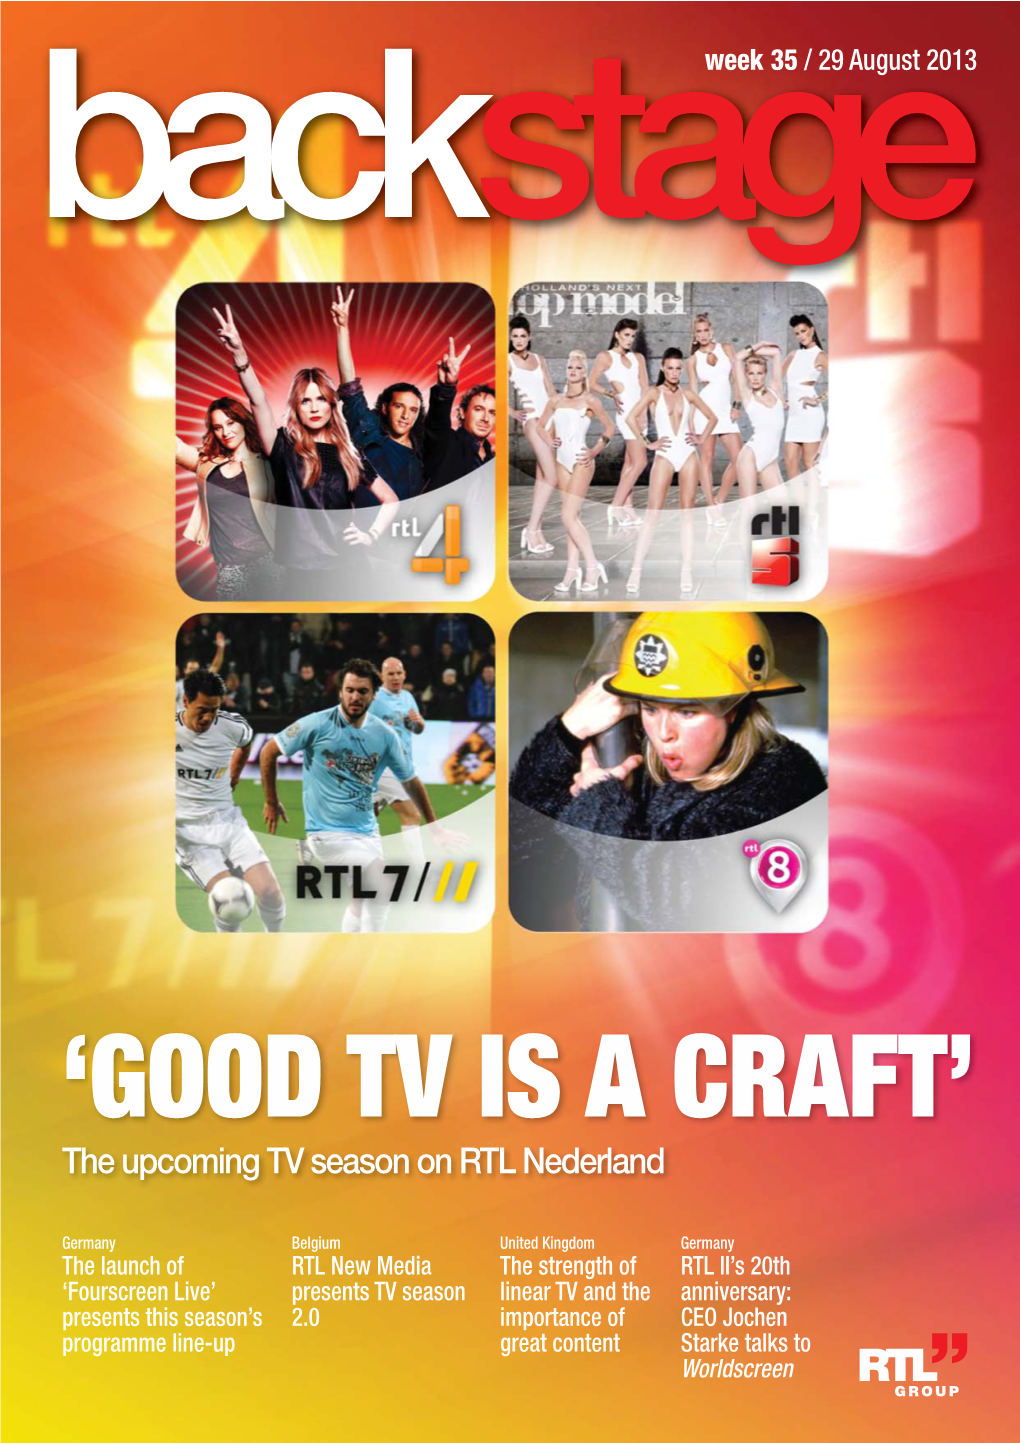 'Good Tv Is a Craft'